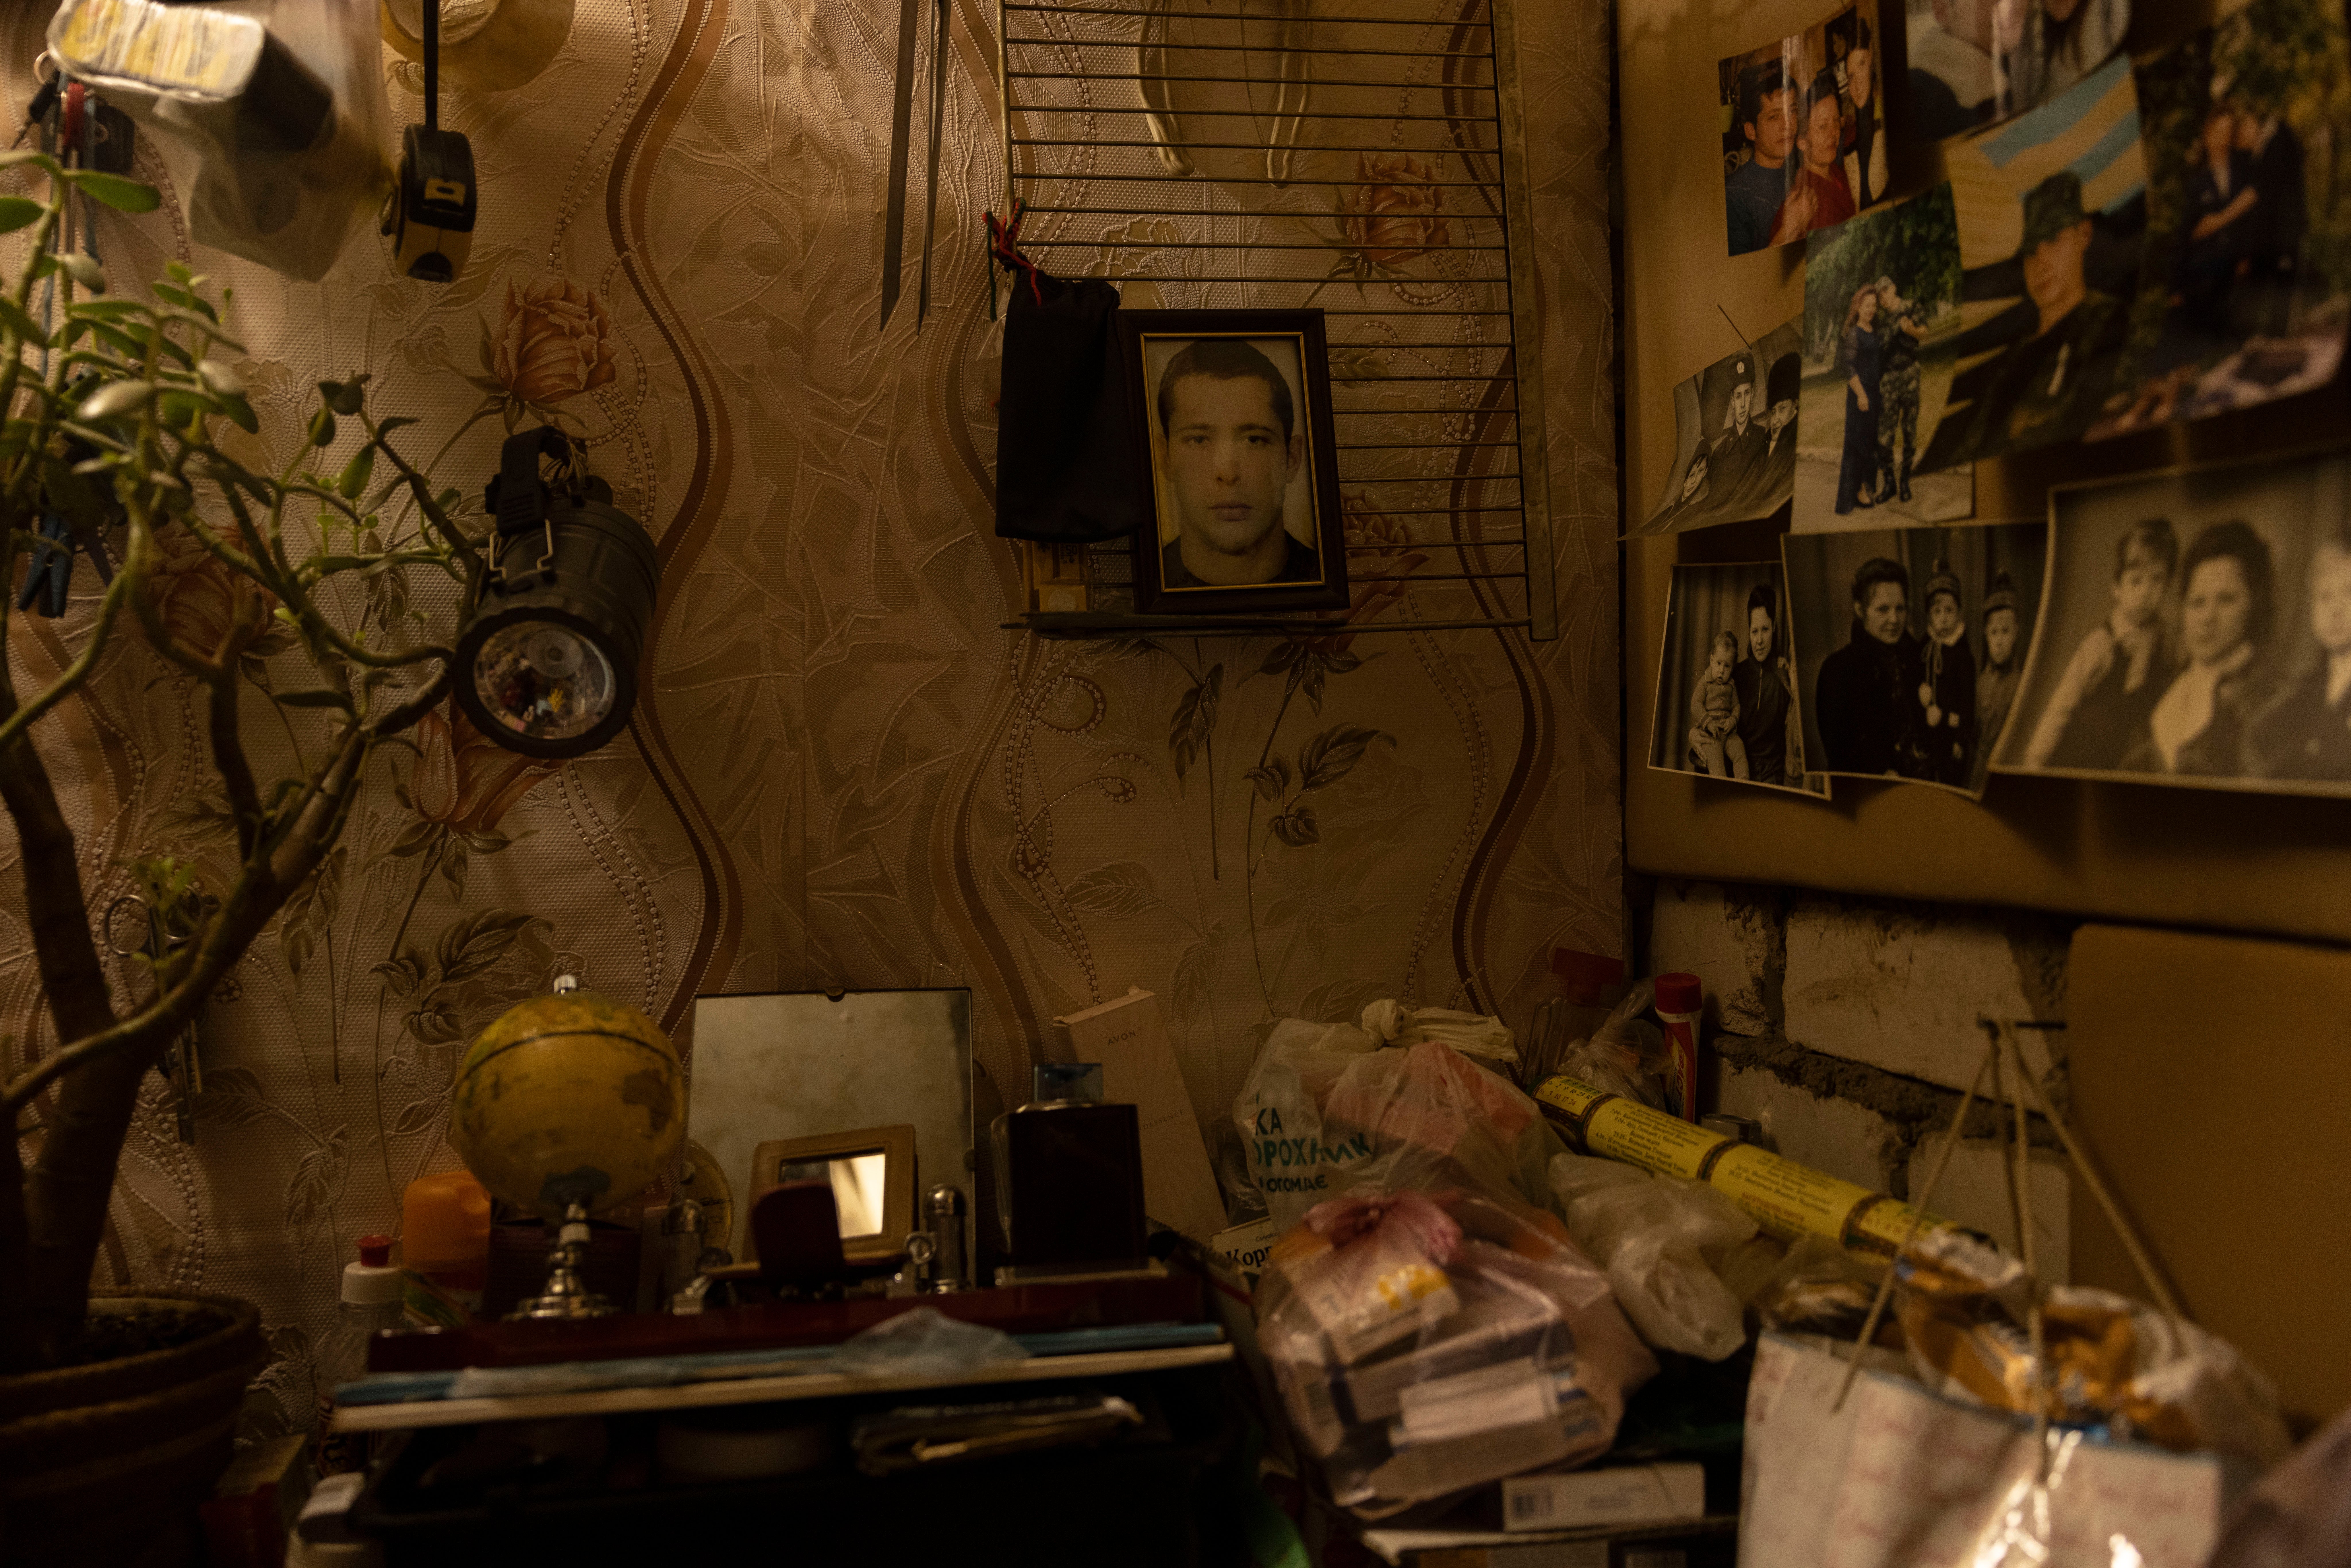 Surzhon’s makeshift bedroom is decorated with family photographs, including a picture of her late son, Pavlo